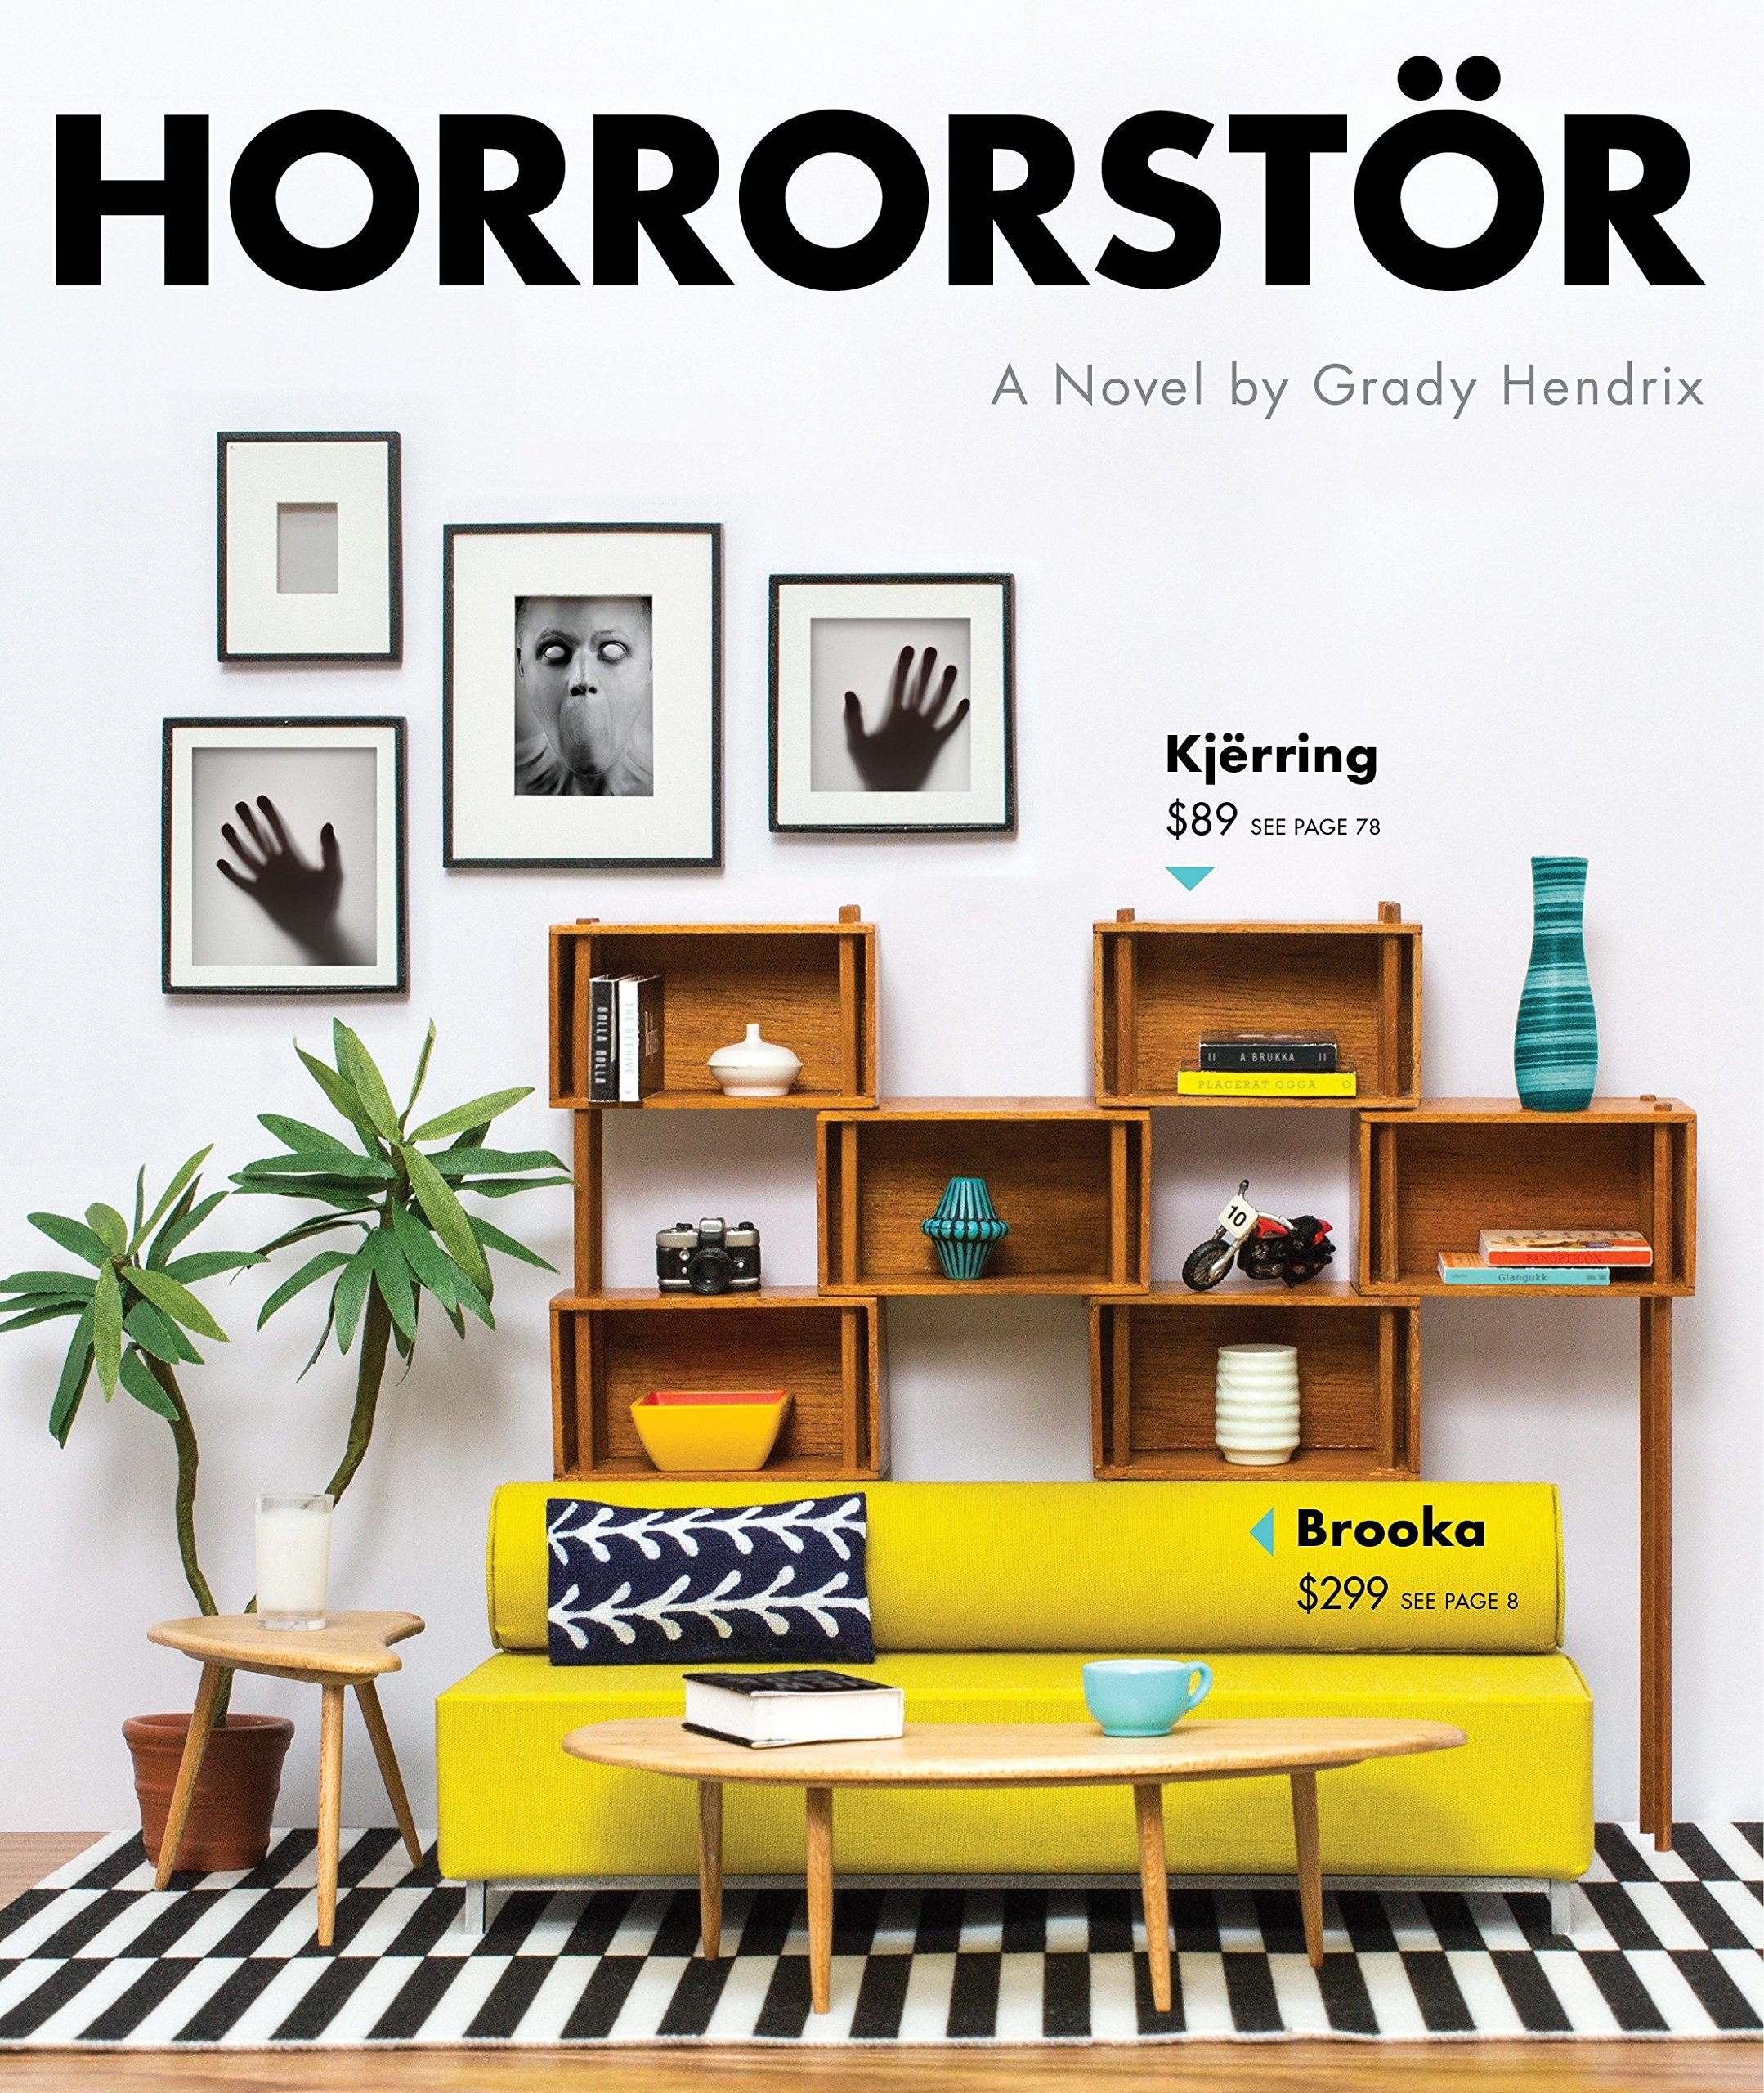 Review: Horrorstor by Grady Hendrix